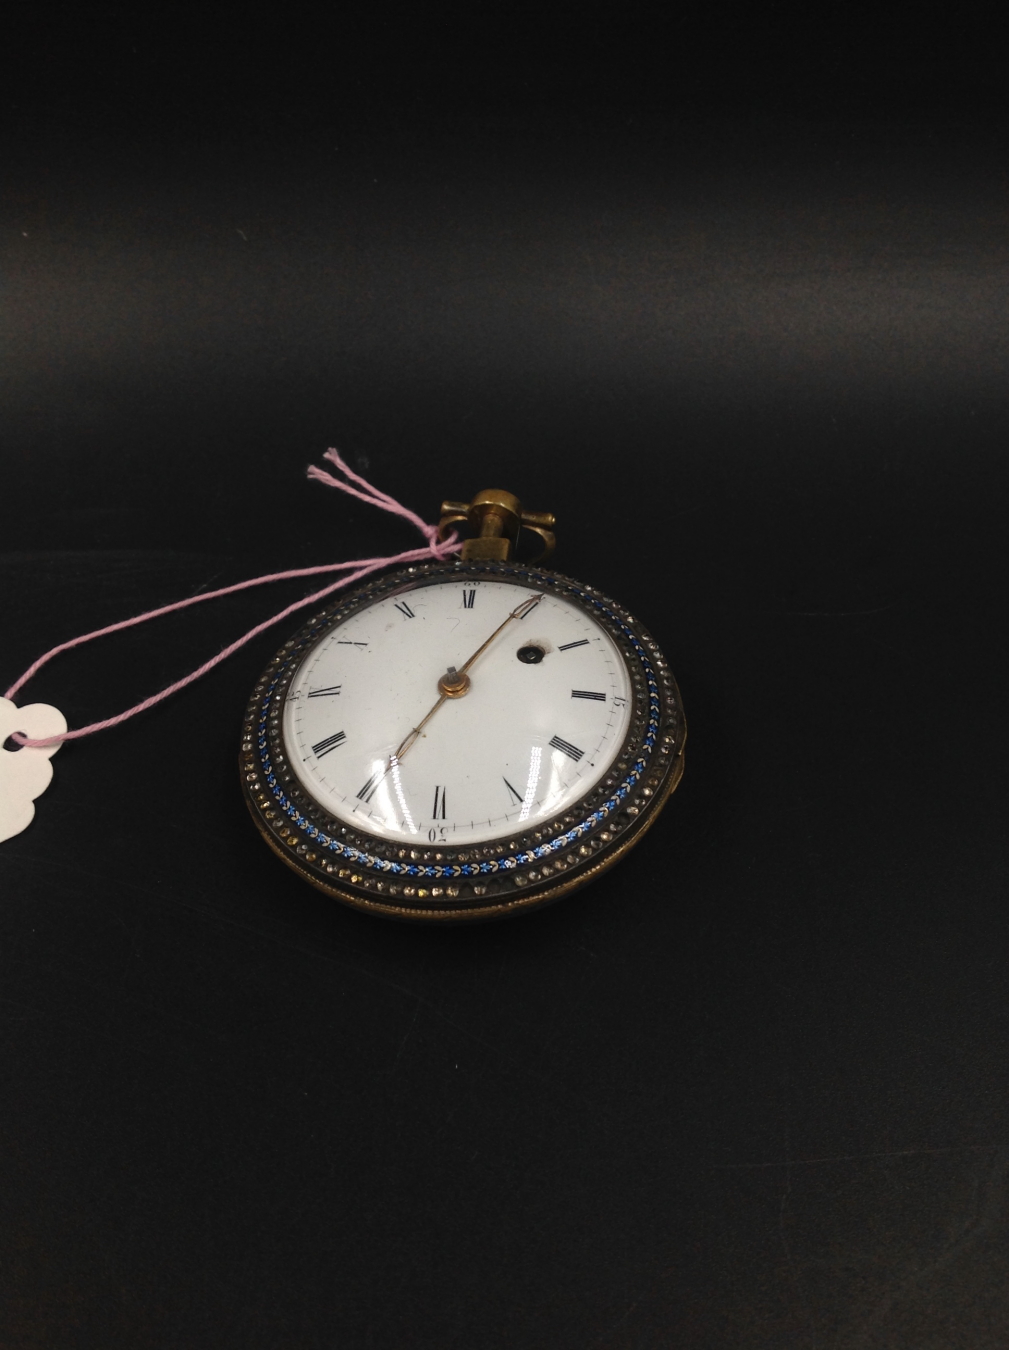 A GOOD LATE 18th/EARLY 19th.C. POCKET WATCH. UNSIGNED SINGLE FUSEE MOVEMENT. DOMED ENAMEL DIAL, - Image 2 of 6